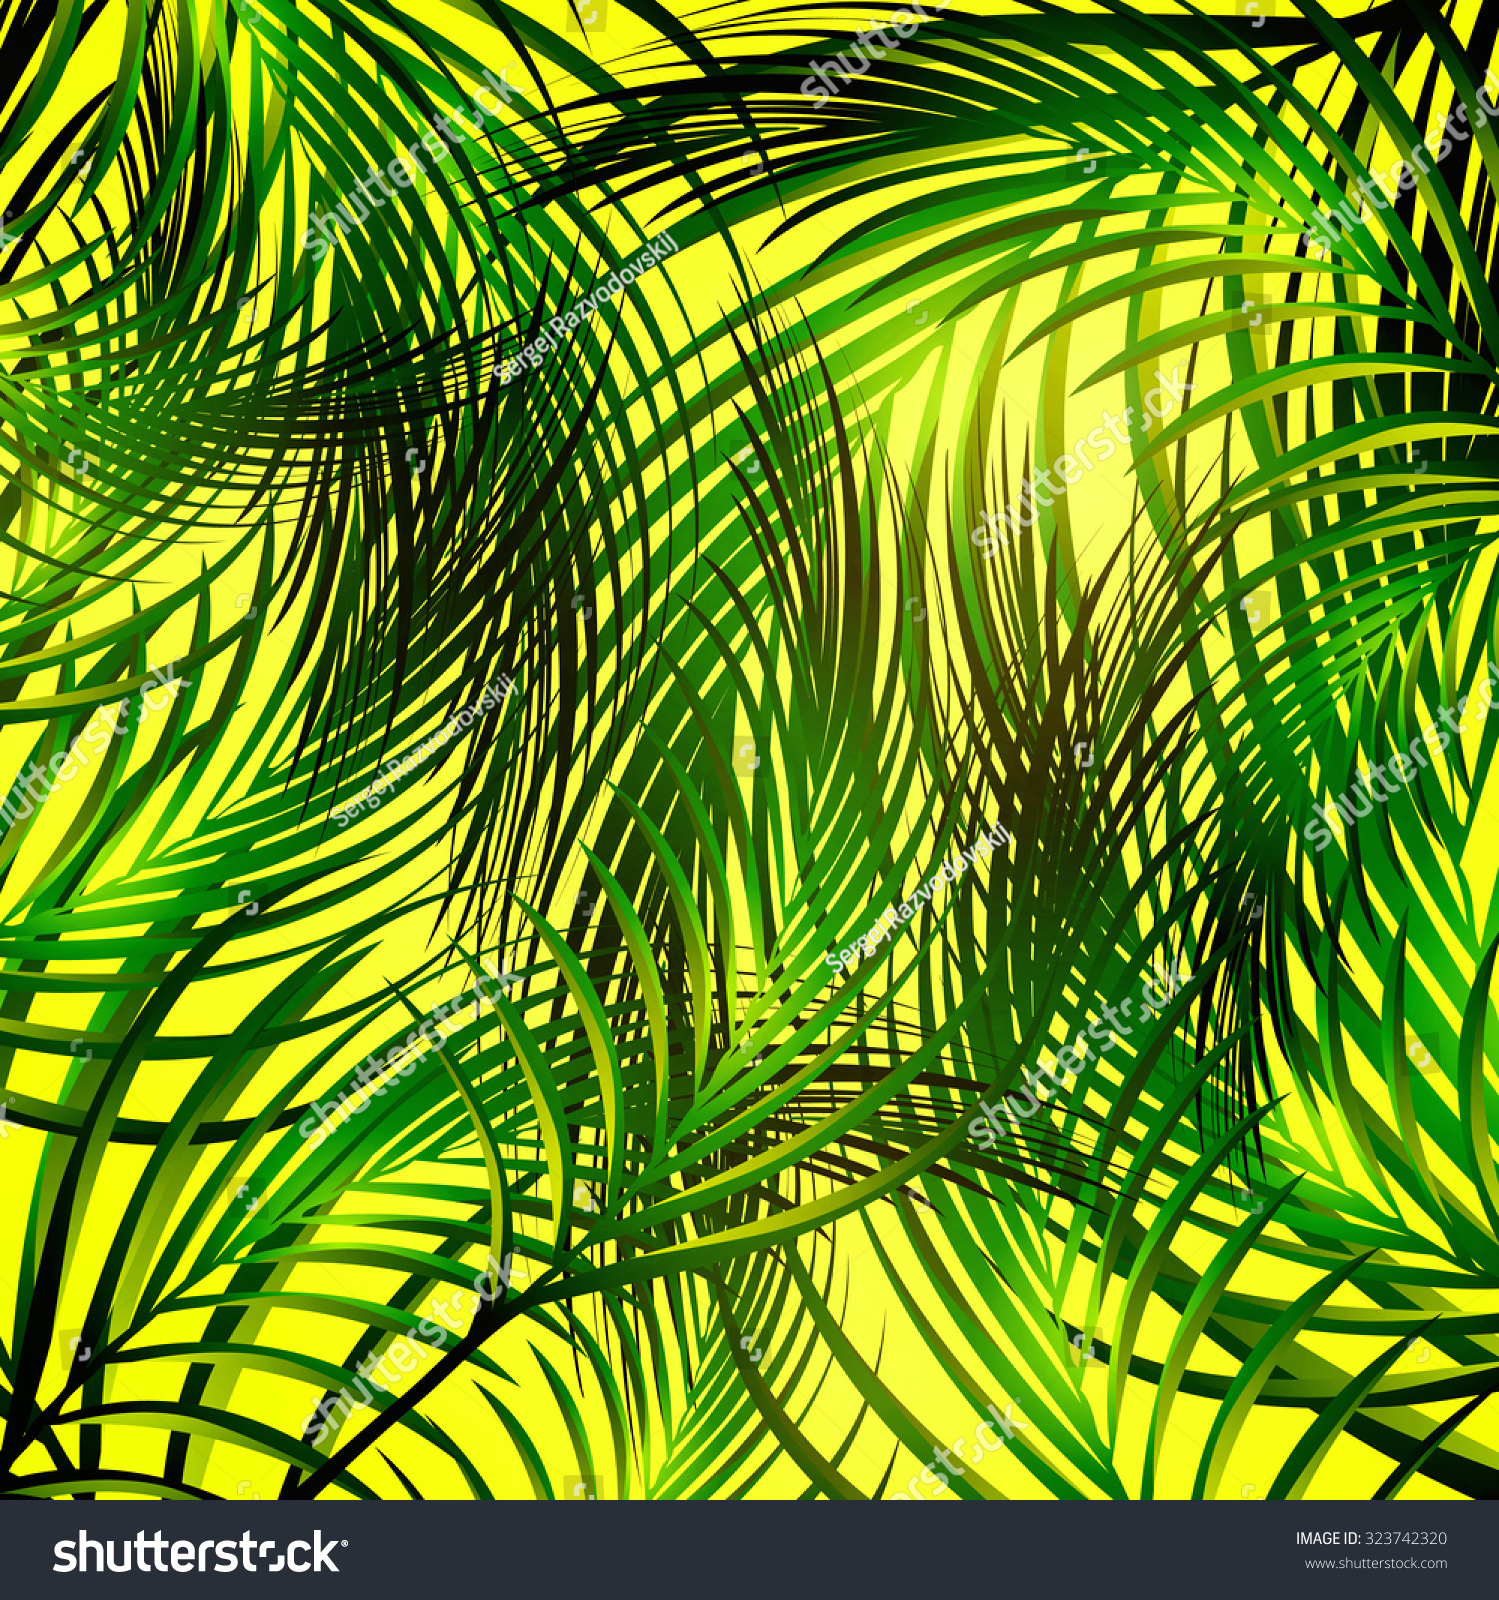 Illustration Abstract Jungle Palm Leaves Background Stock Vector HD ...